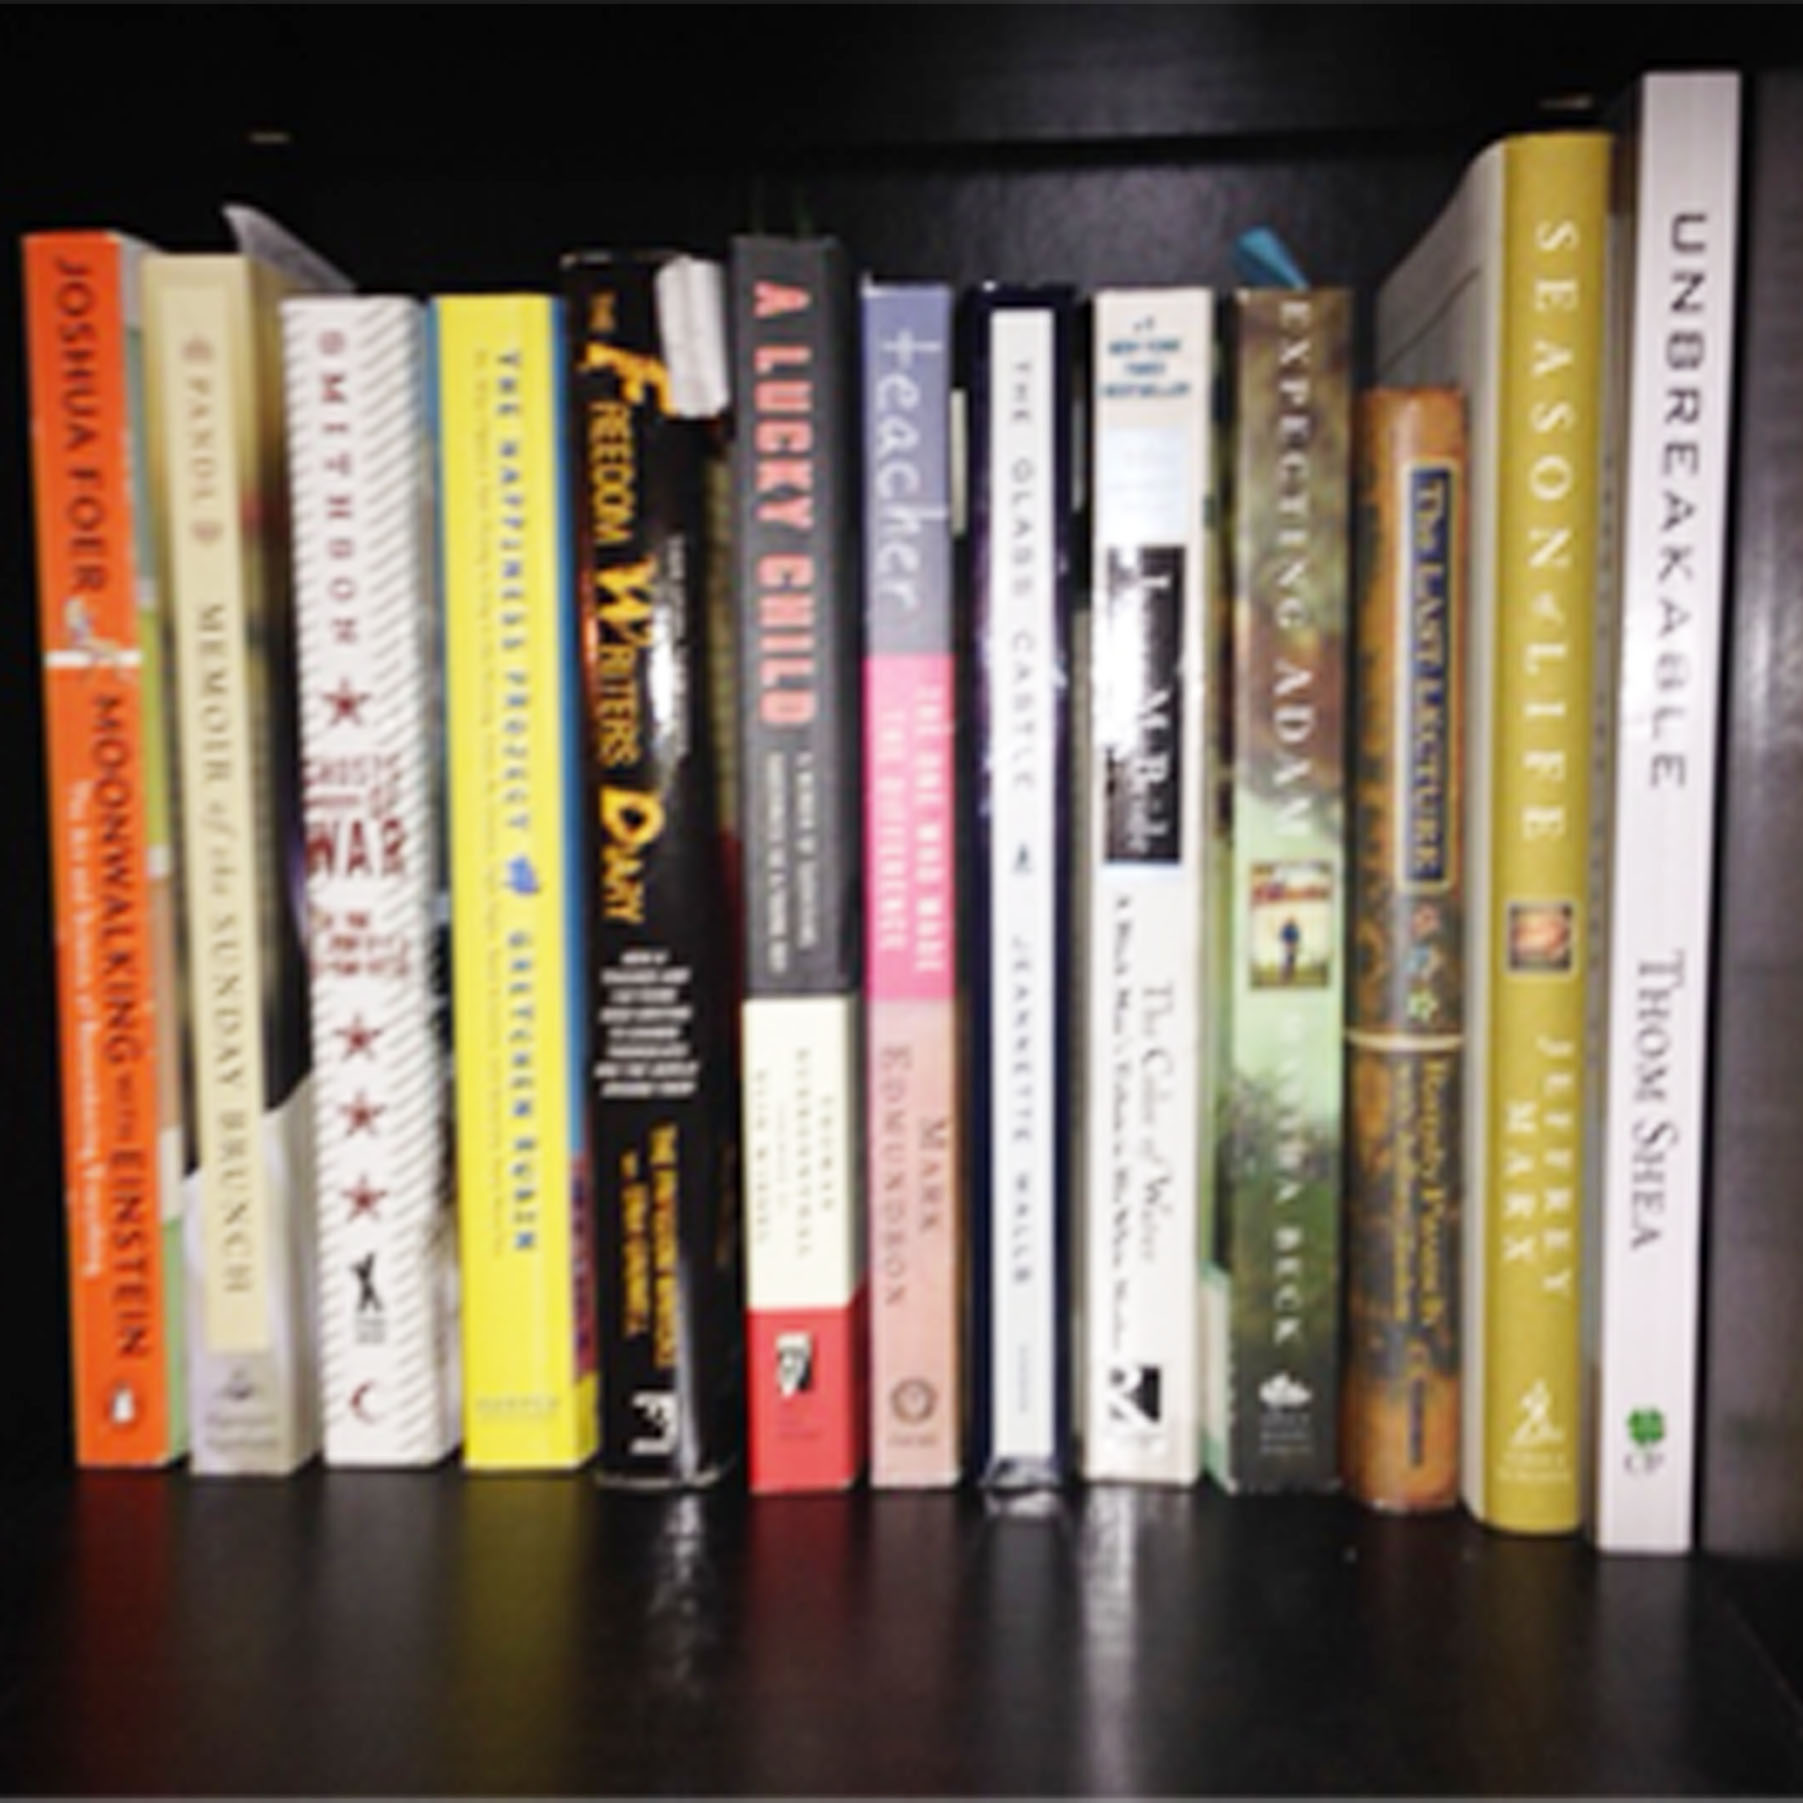 A photo of A set of books on a bookshelf representing Sunday Dinner Stories's LIfe Story Library.